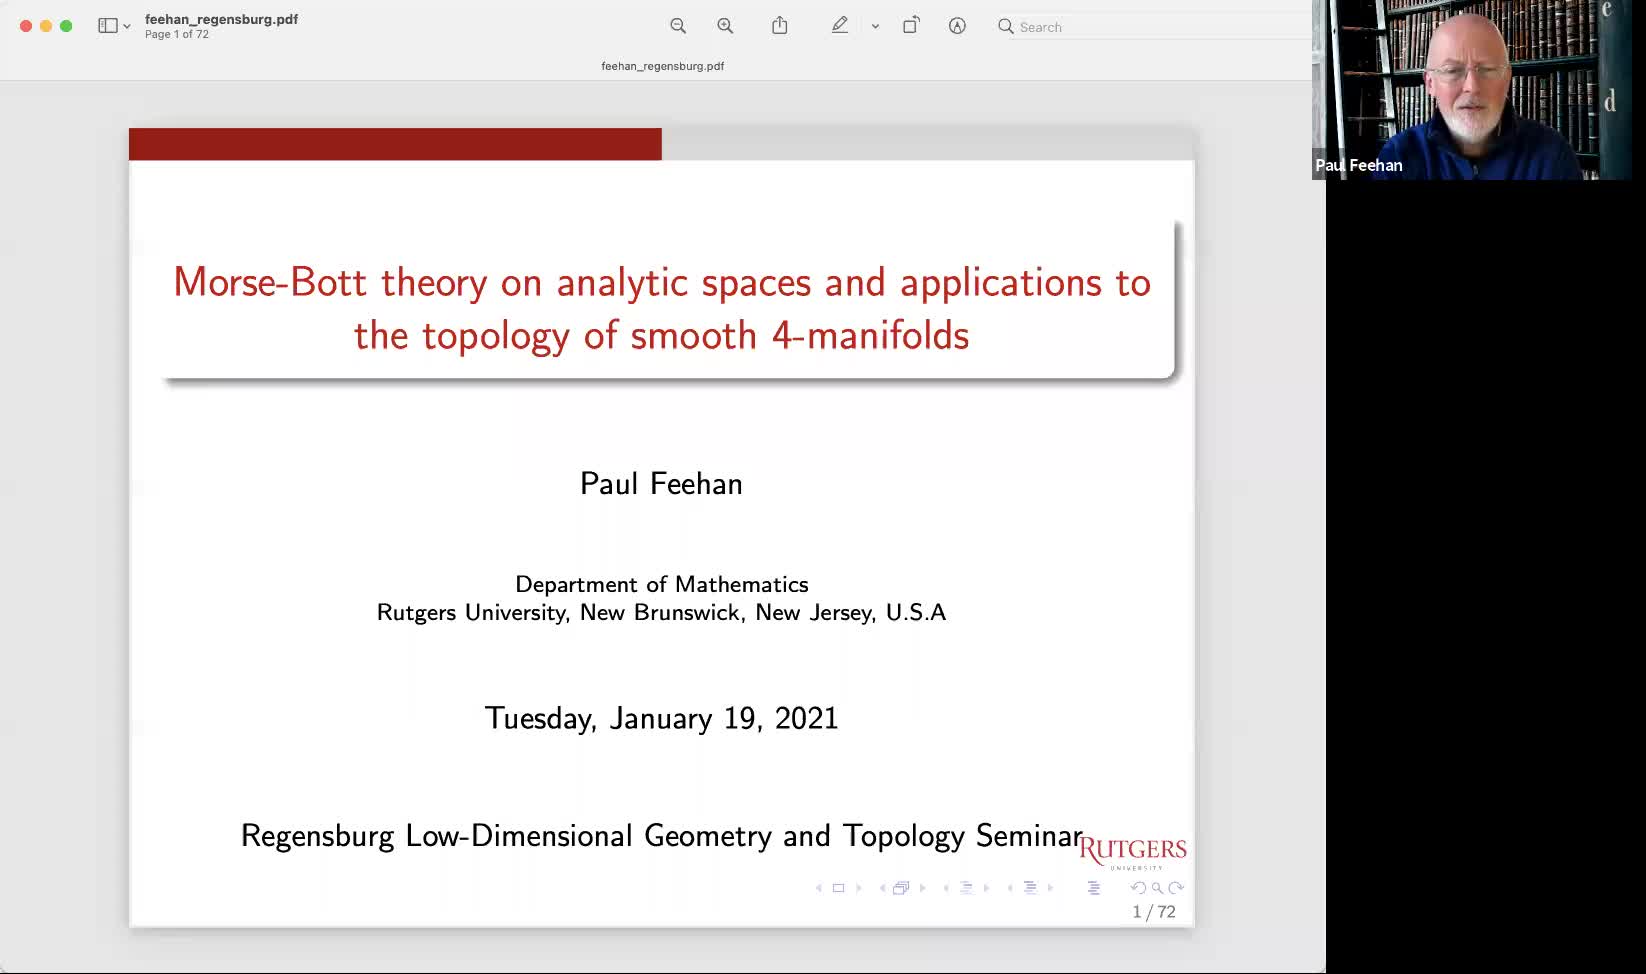 Paul Feehan: Morse-Bott theory on analytic spaces and applications to topology of smooth 4-manifolds